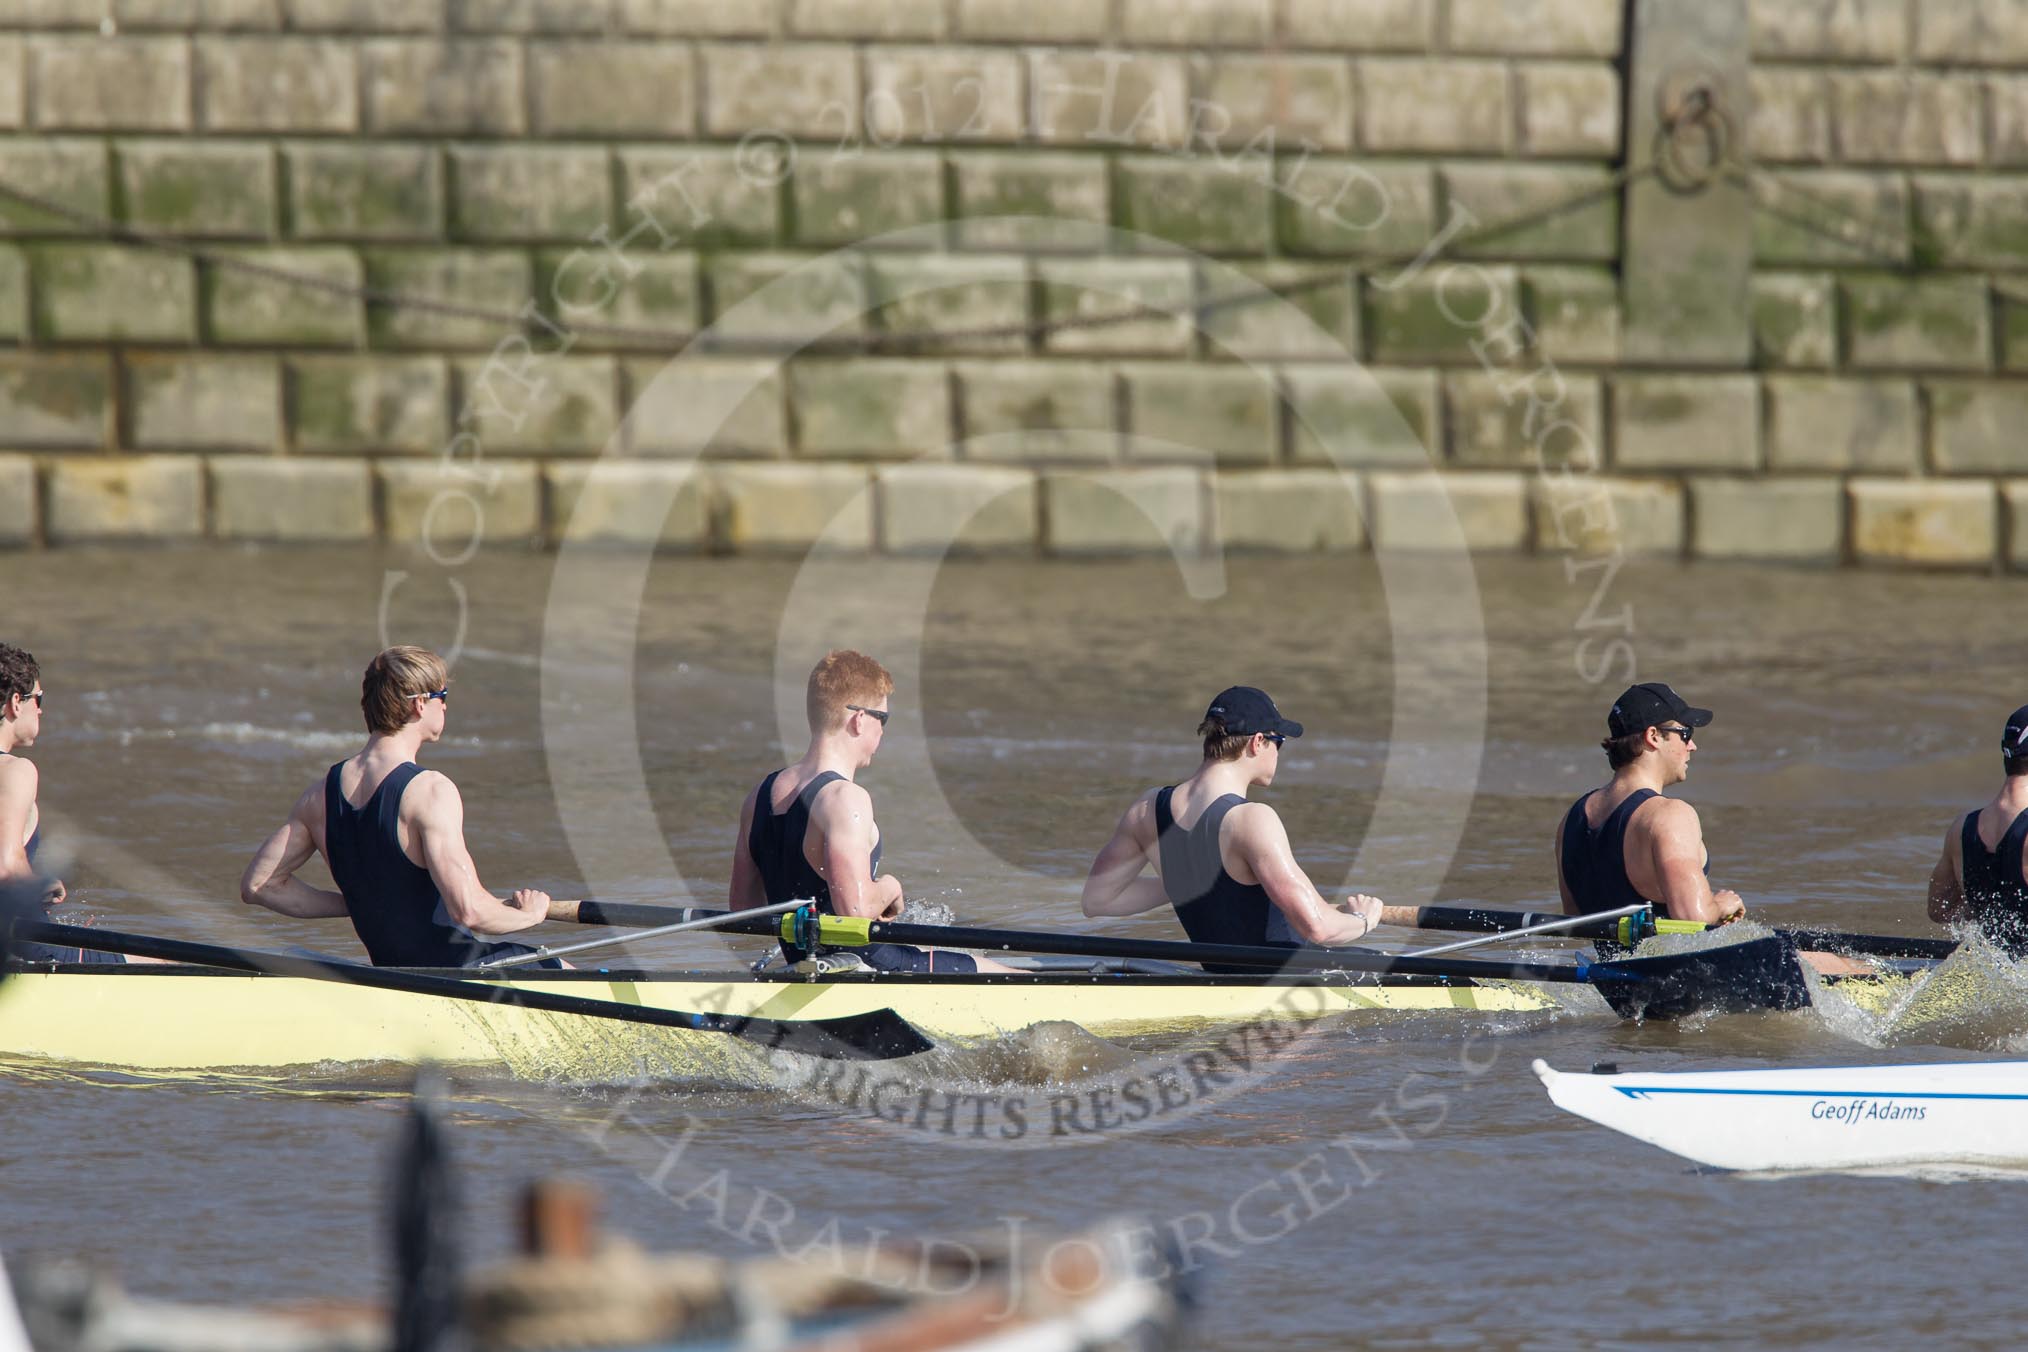 The Boat Race season 2012 - fixture OUBC vs Leander: The OUBC Isis crew racing Tideway Scullers -  Julian Bubb-Humfryes, Ben Snodin, Joe Dawson, Geordie Macleod, Justin Webb, and stroke Tom Watson..




on 24 March 2012 at 14:00, image #65